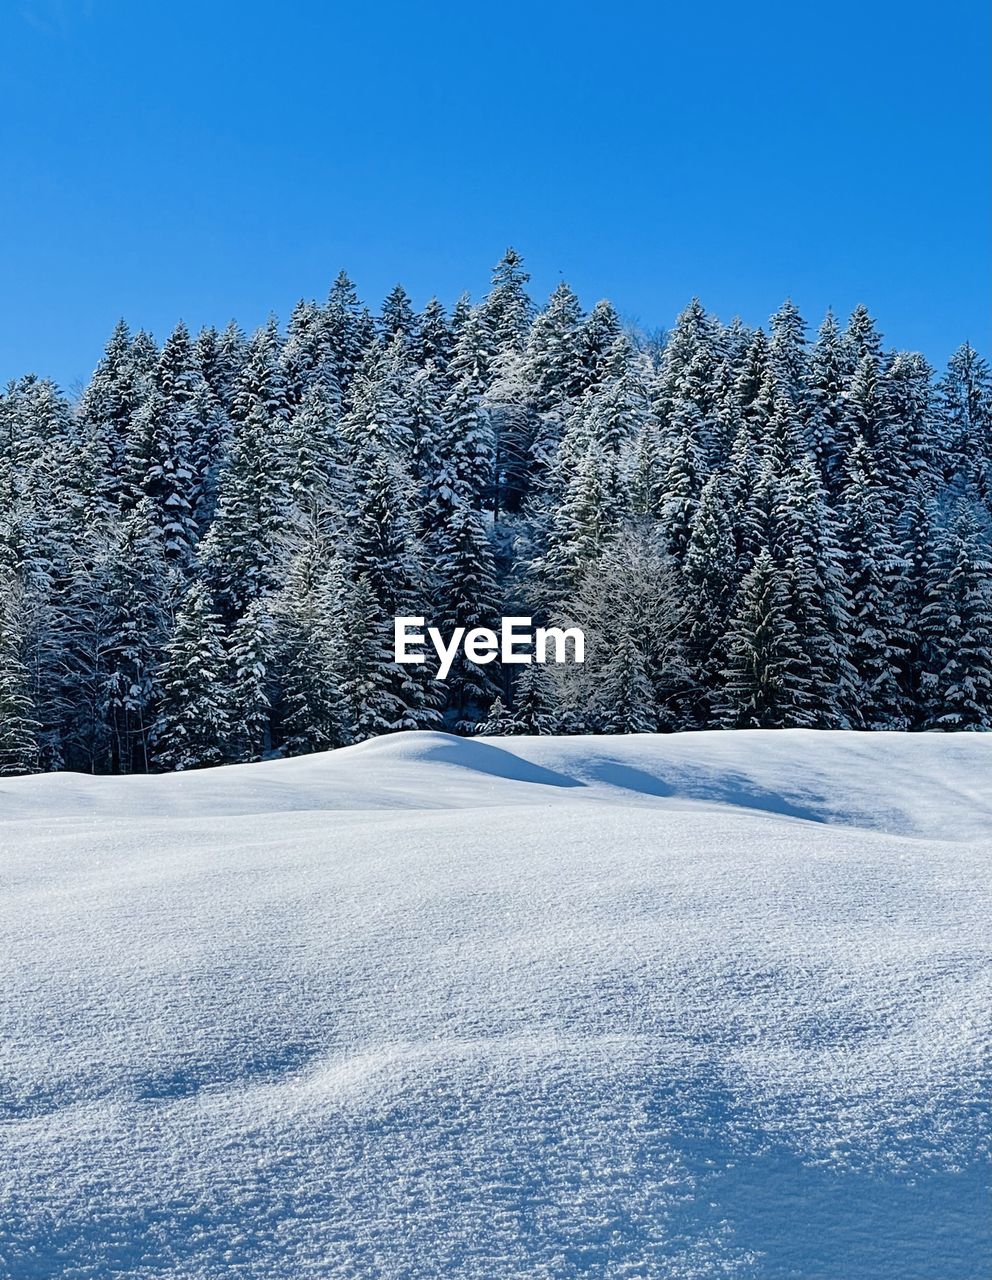 SNOW COVERED LAND AGAINST CLEAR BLUE SKY